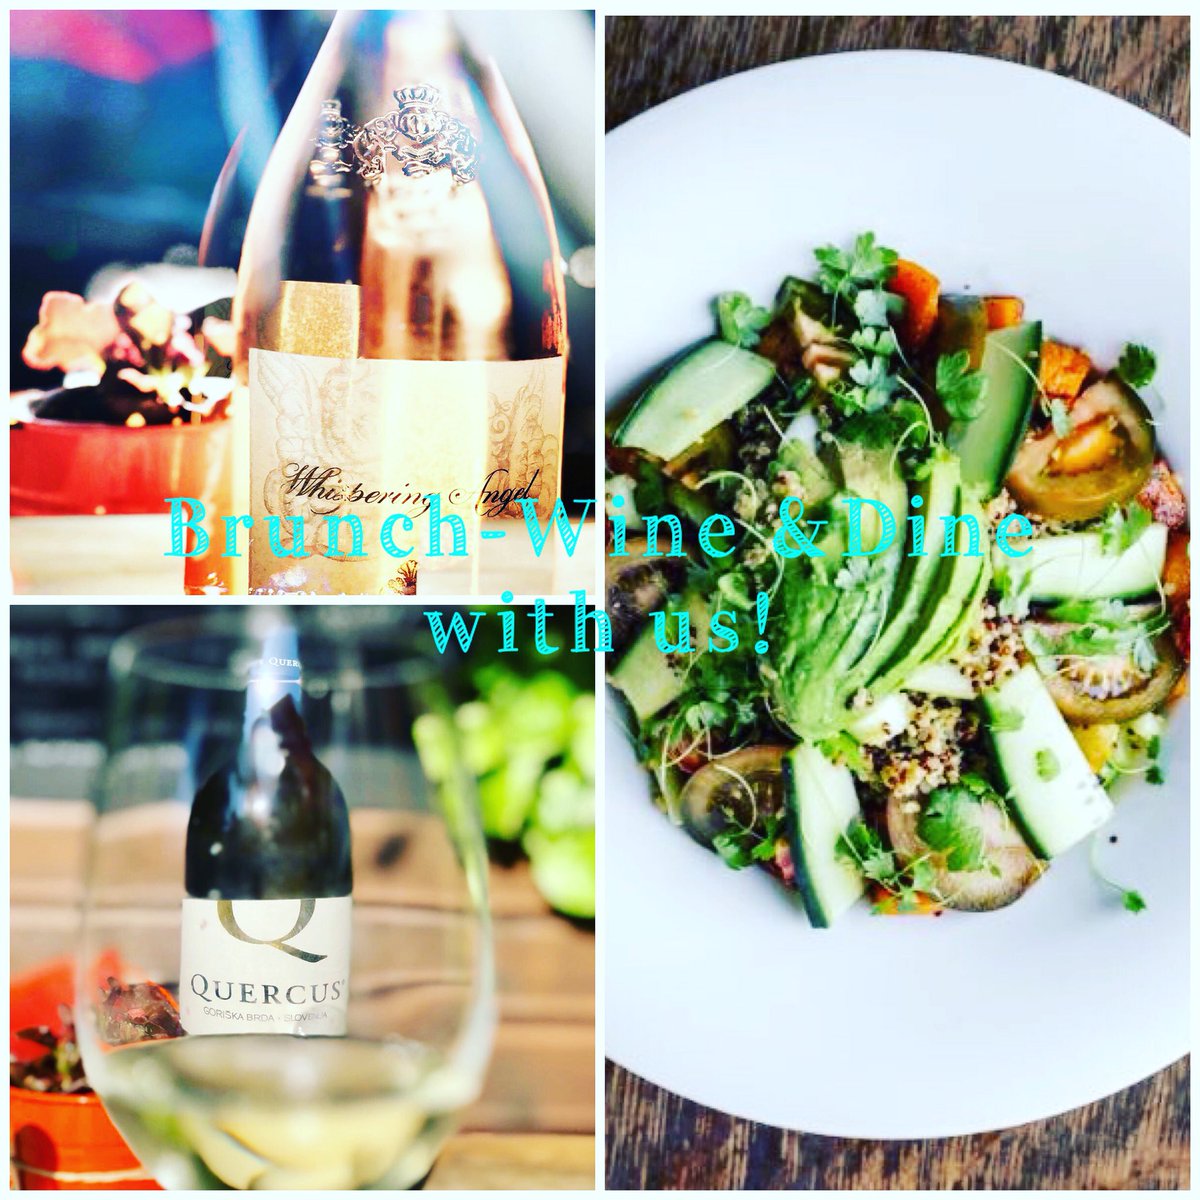 If you like Pinot Grigio why not try #Quercus from #Slovenia or our outstanding rose #whisperingangel from #cotesdeprovence perfect with our brunch salads @berkmann_wine @youngspubs #dinewinestyle #winelovers🍷 #brunch #dinner #hampsteadheath